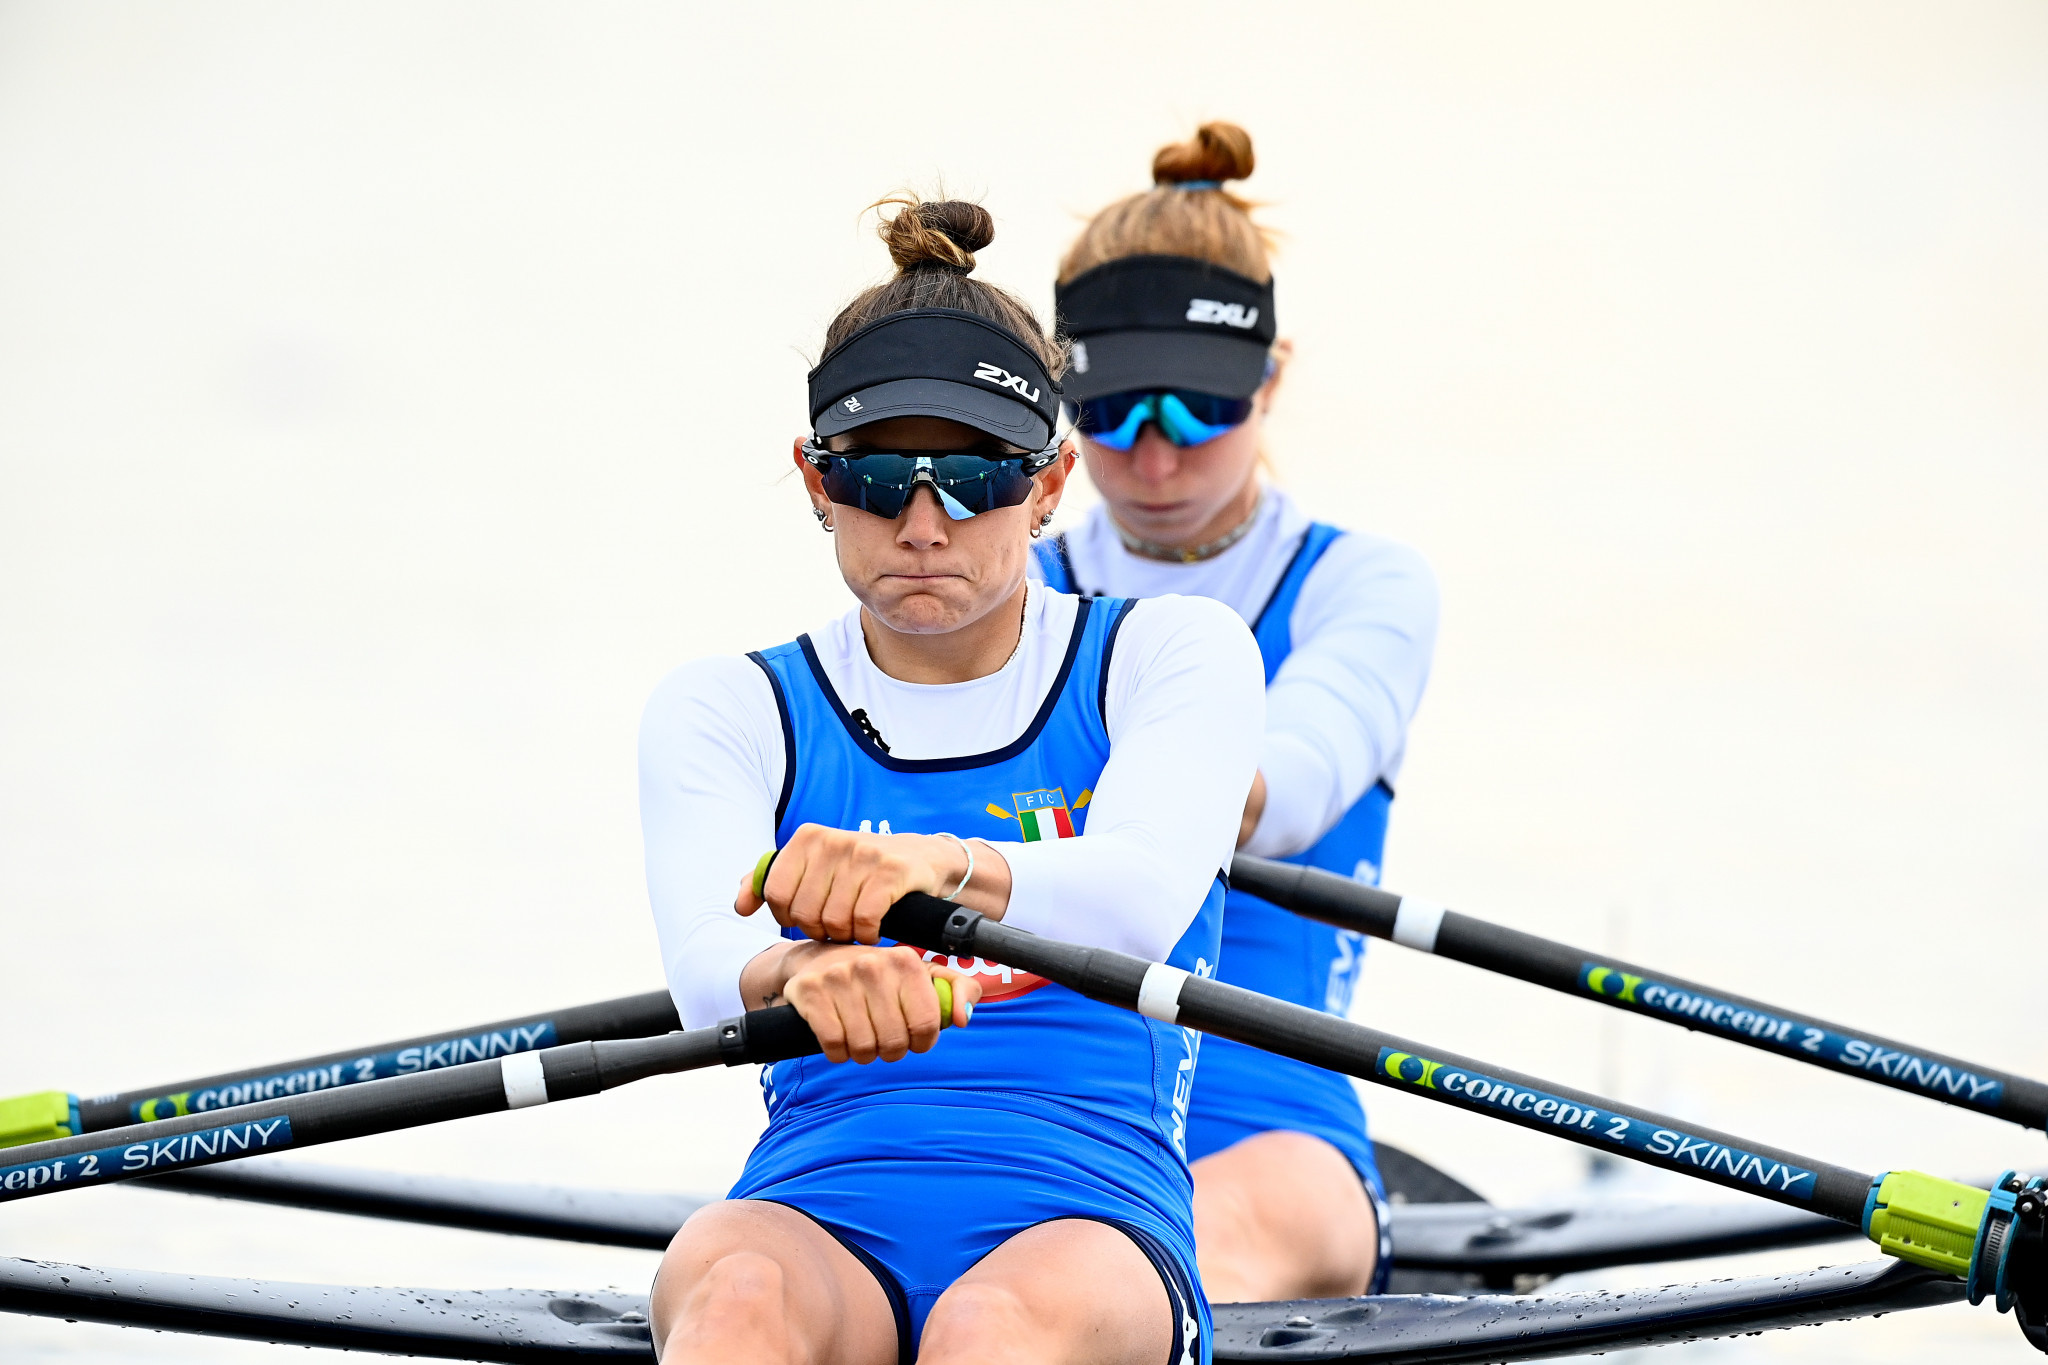 Olympic champions Rodini and Cesarini miss out on final at World Rowing Championships